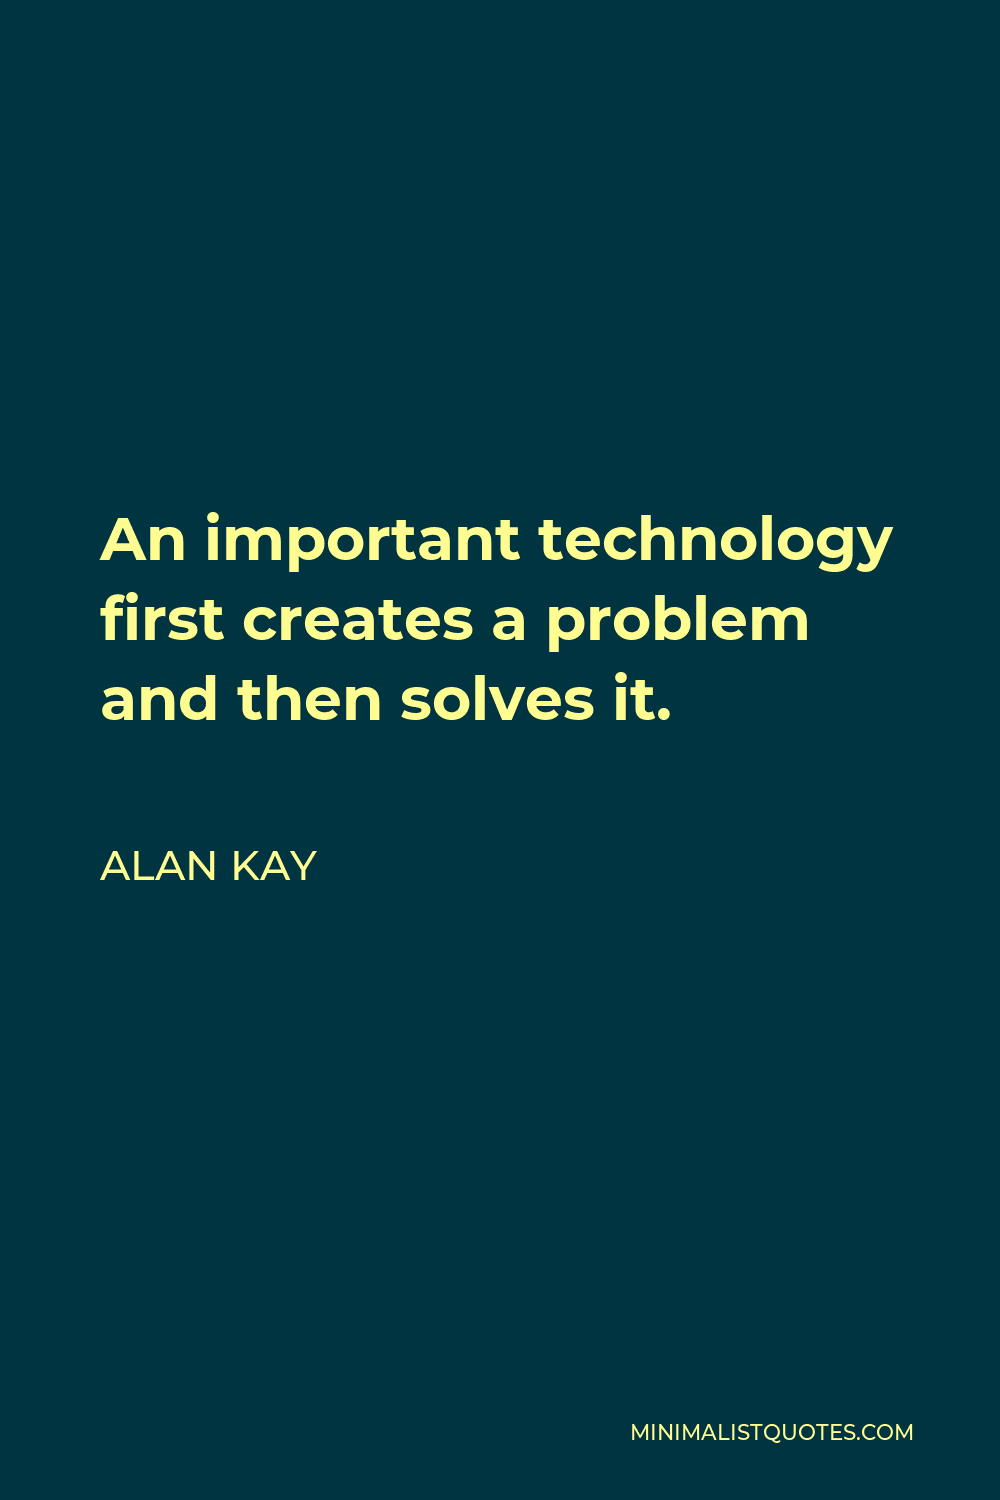 Alan Kay Quote - An important technology first creates a problem and then solves it.